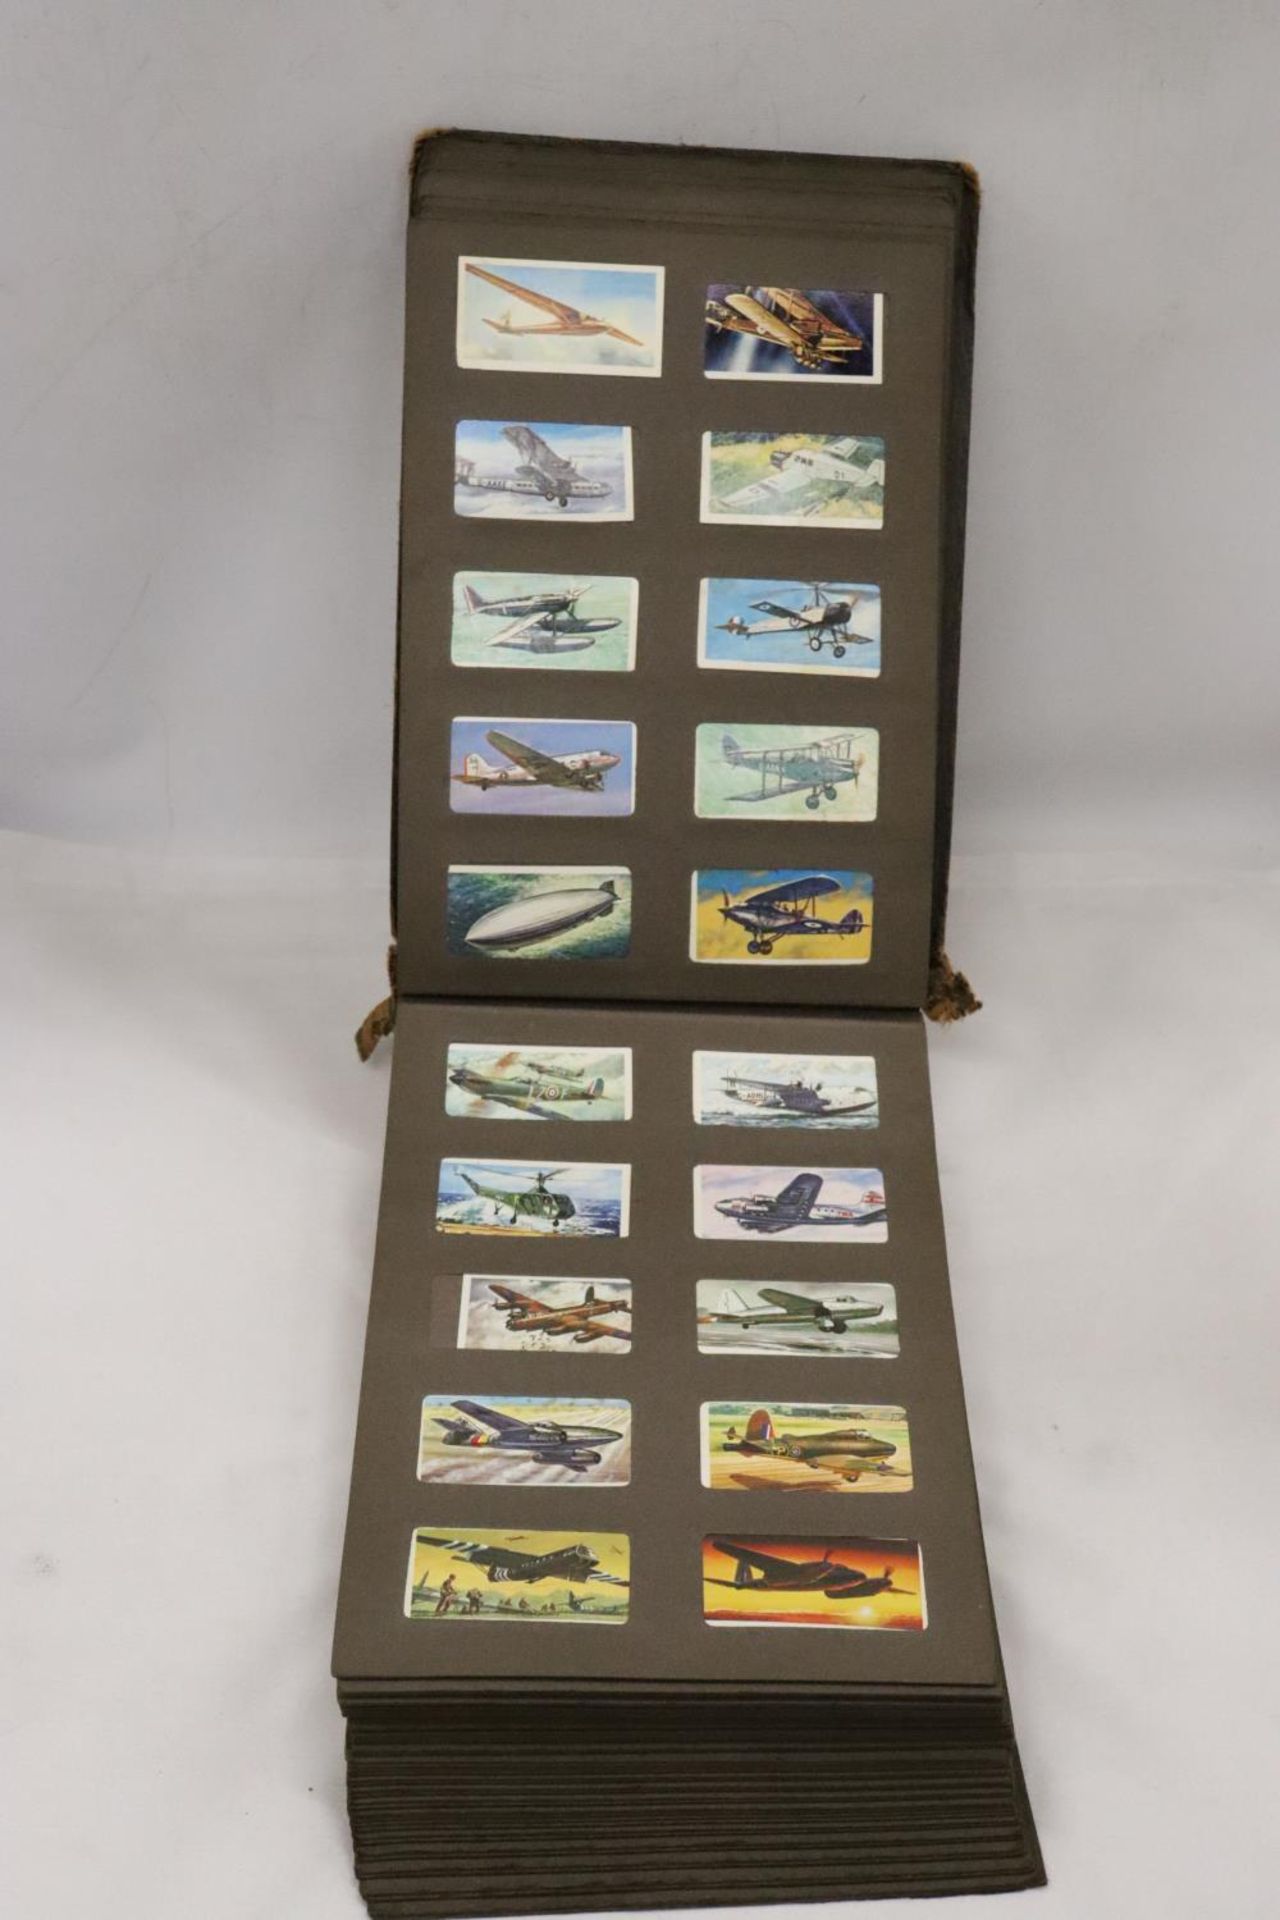 AN ALBUM CONTAINING A COLLECTION OF CIGARETTE CARDS - Image 4 of 6